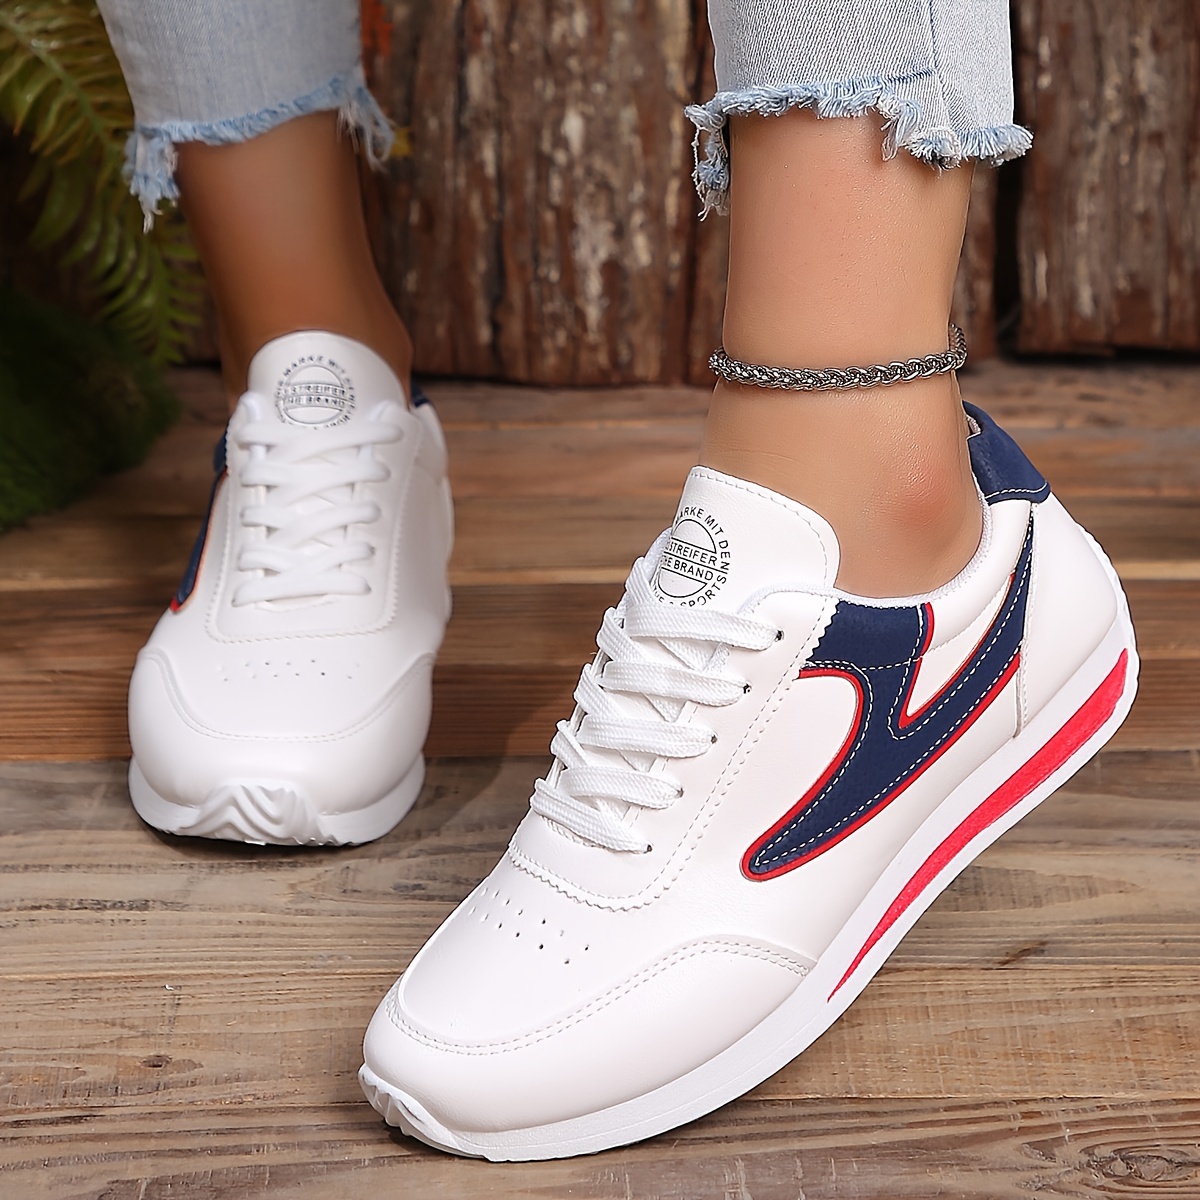 simple flat sneakers women s casual lace outdoor shoes details 4